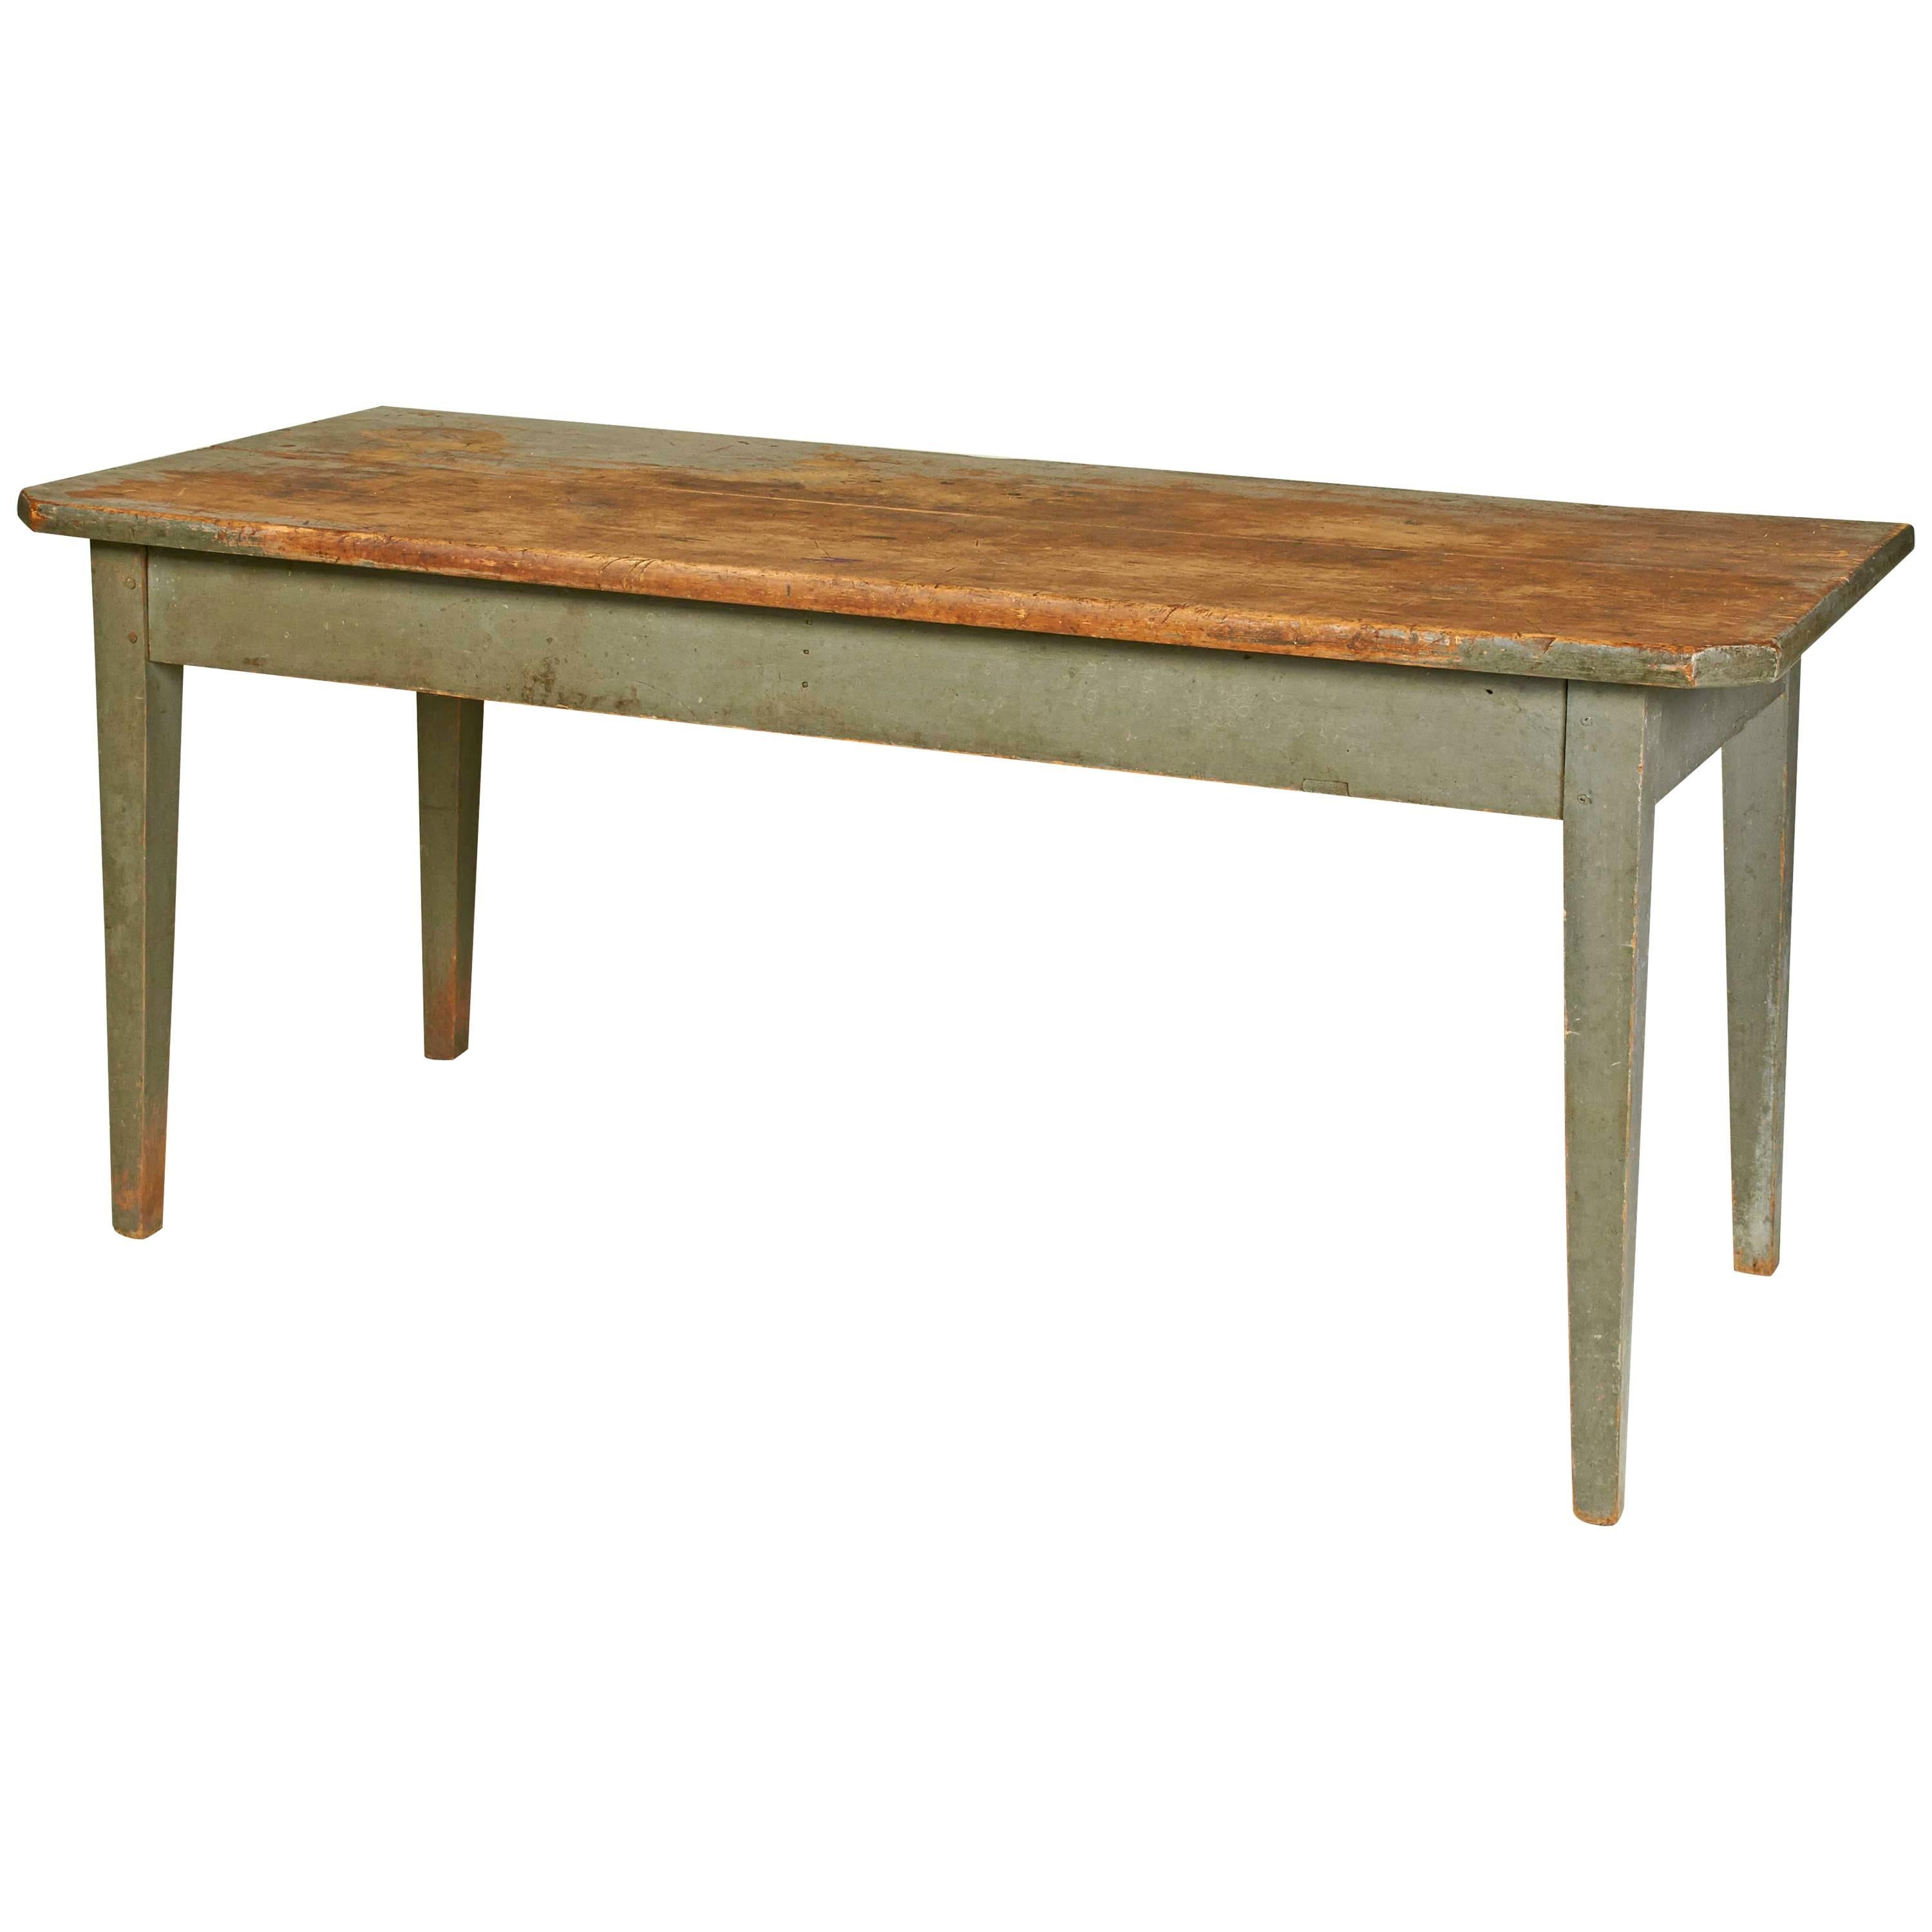 Blue-Grey Painted Pine Farm Table with Scrubbed Top